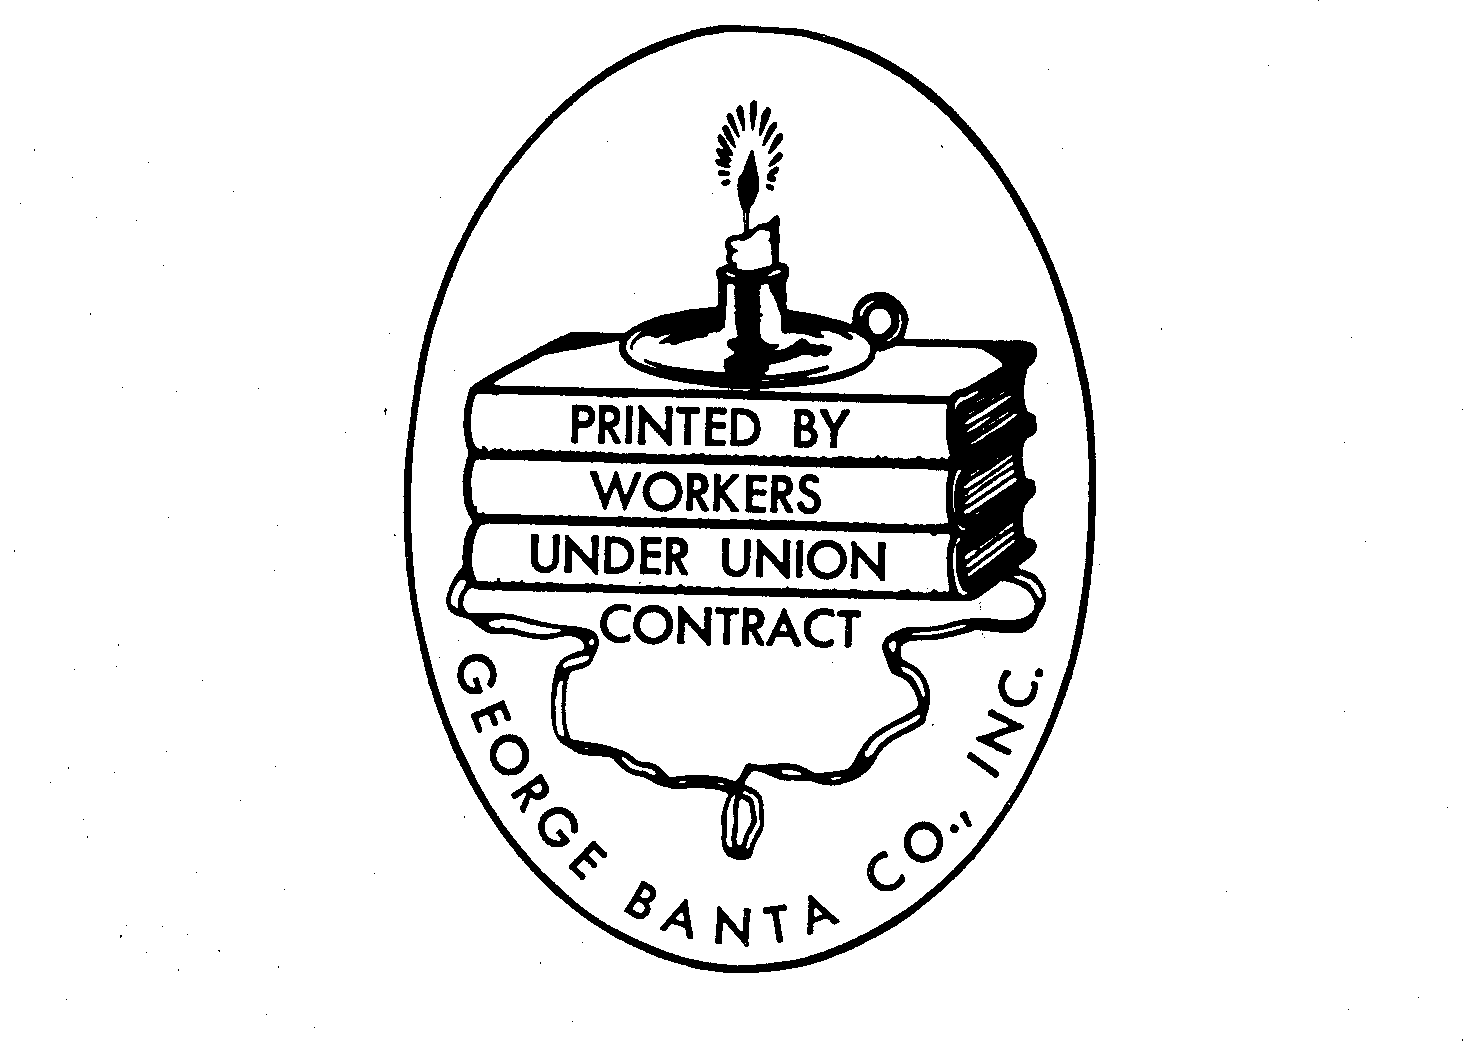 Trademark Logo PRINTED BY WORKERS UNDER UNION CONTRACT GEORGE BANTA CO. INC.